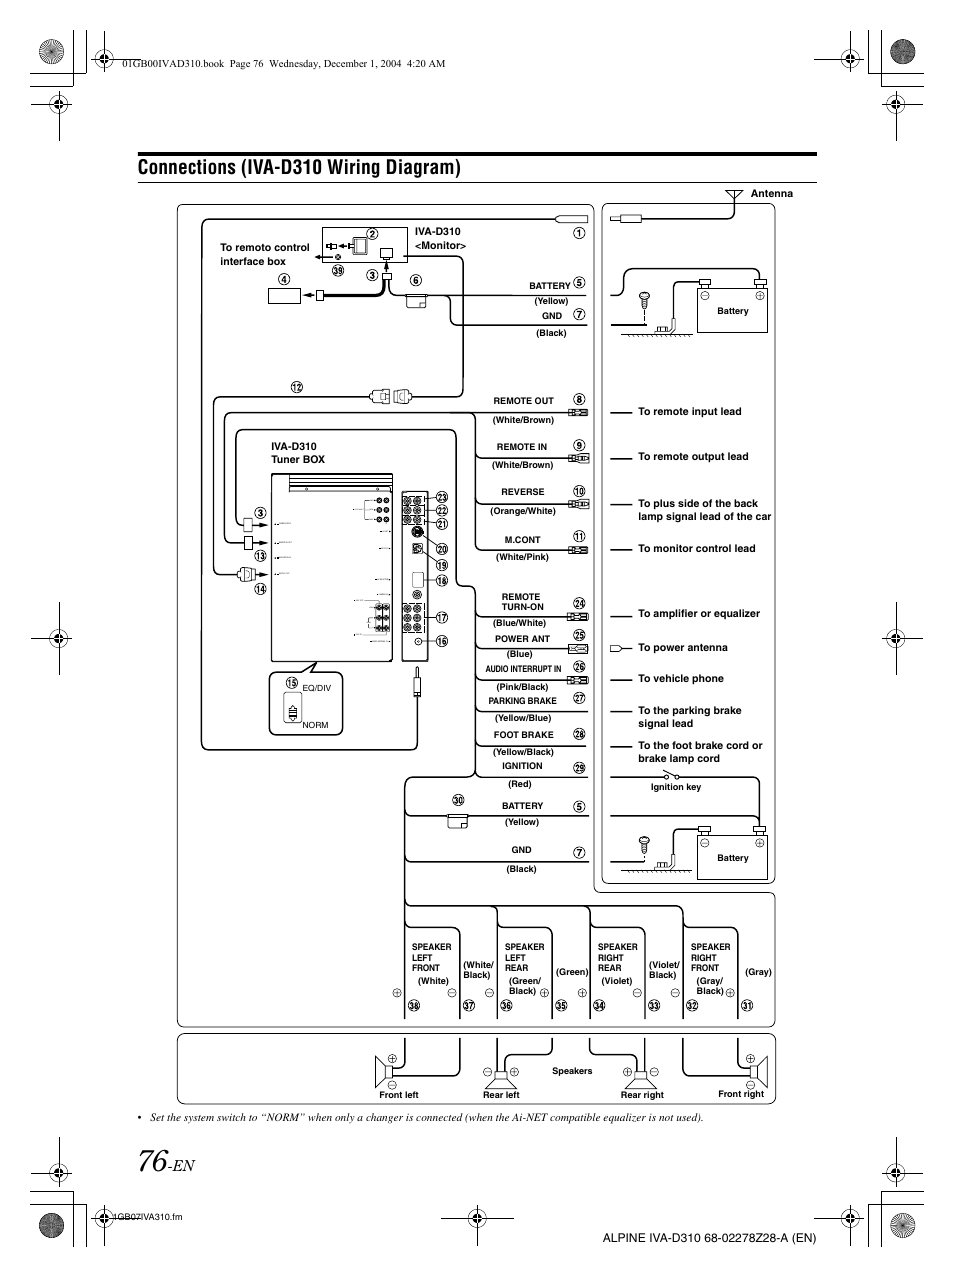 Connections (iva-d310 wiring diagram) | Alpine IVA-D310 User Manual